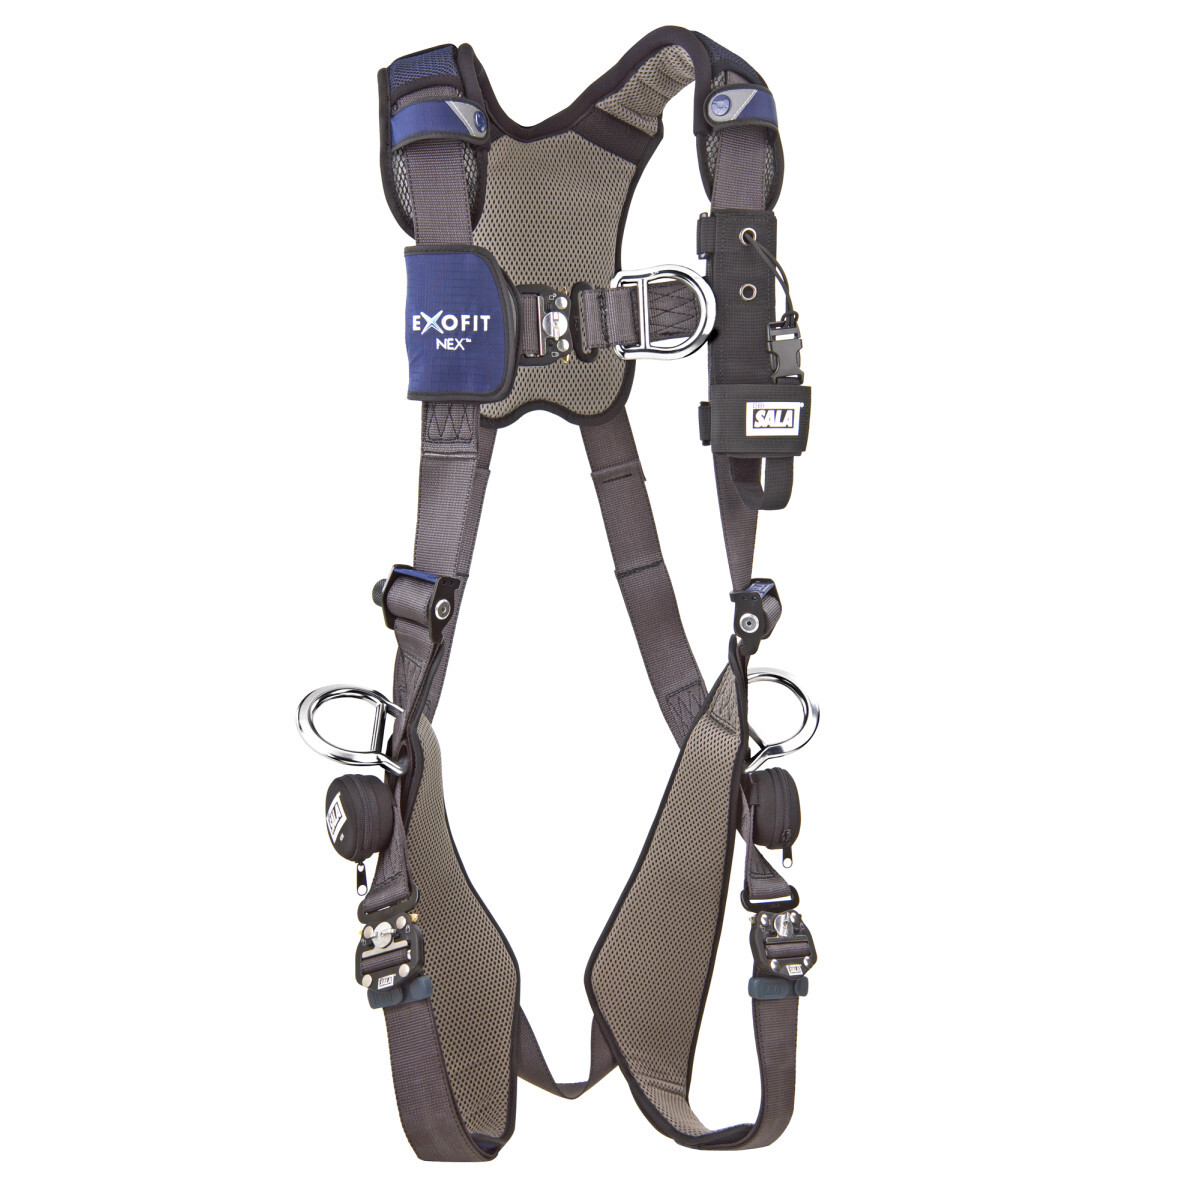 3M™ DBI-SALA® Medium ExoFit NEX™ Full Body/Vest Style Harness With Tech-Lite™ Aluminum Back, Front And Side D-Ring, Duo-Lok™ Qui